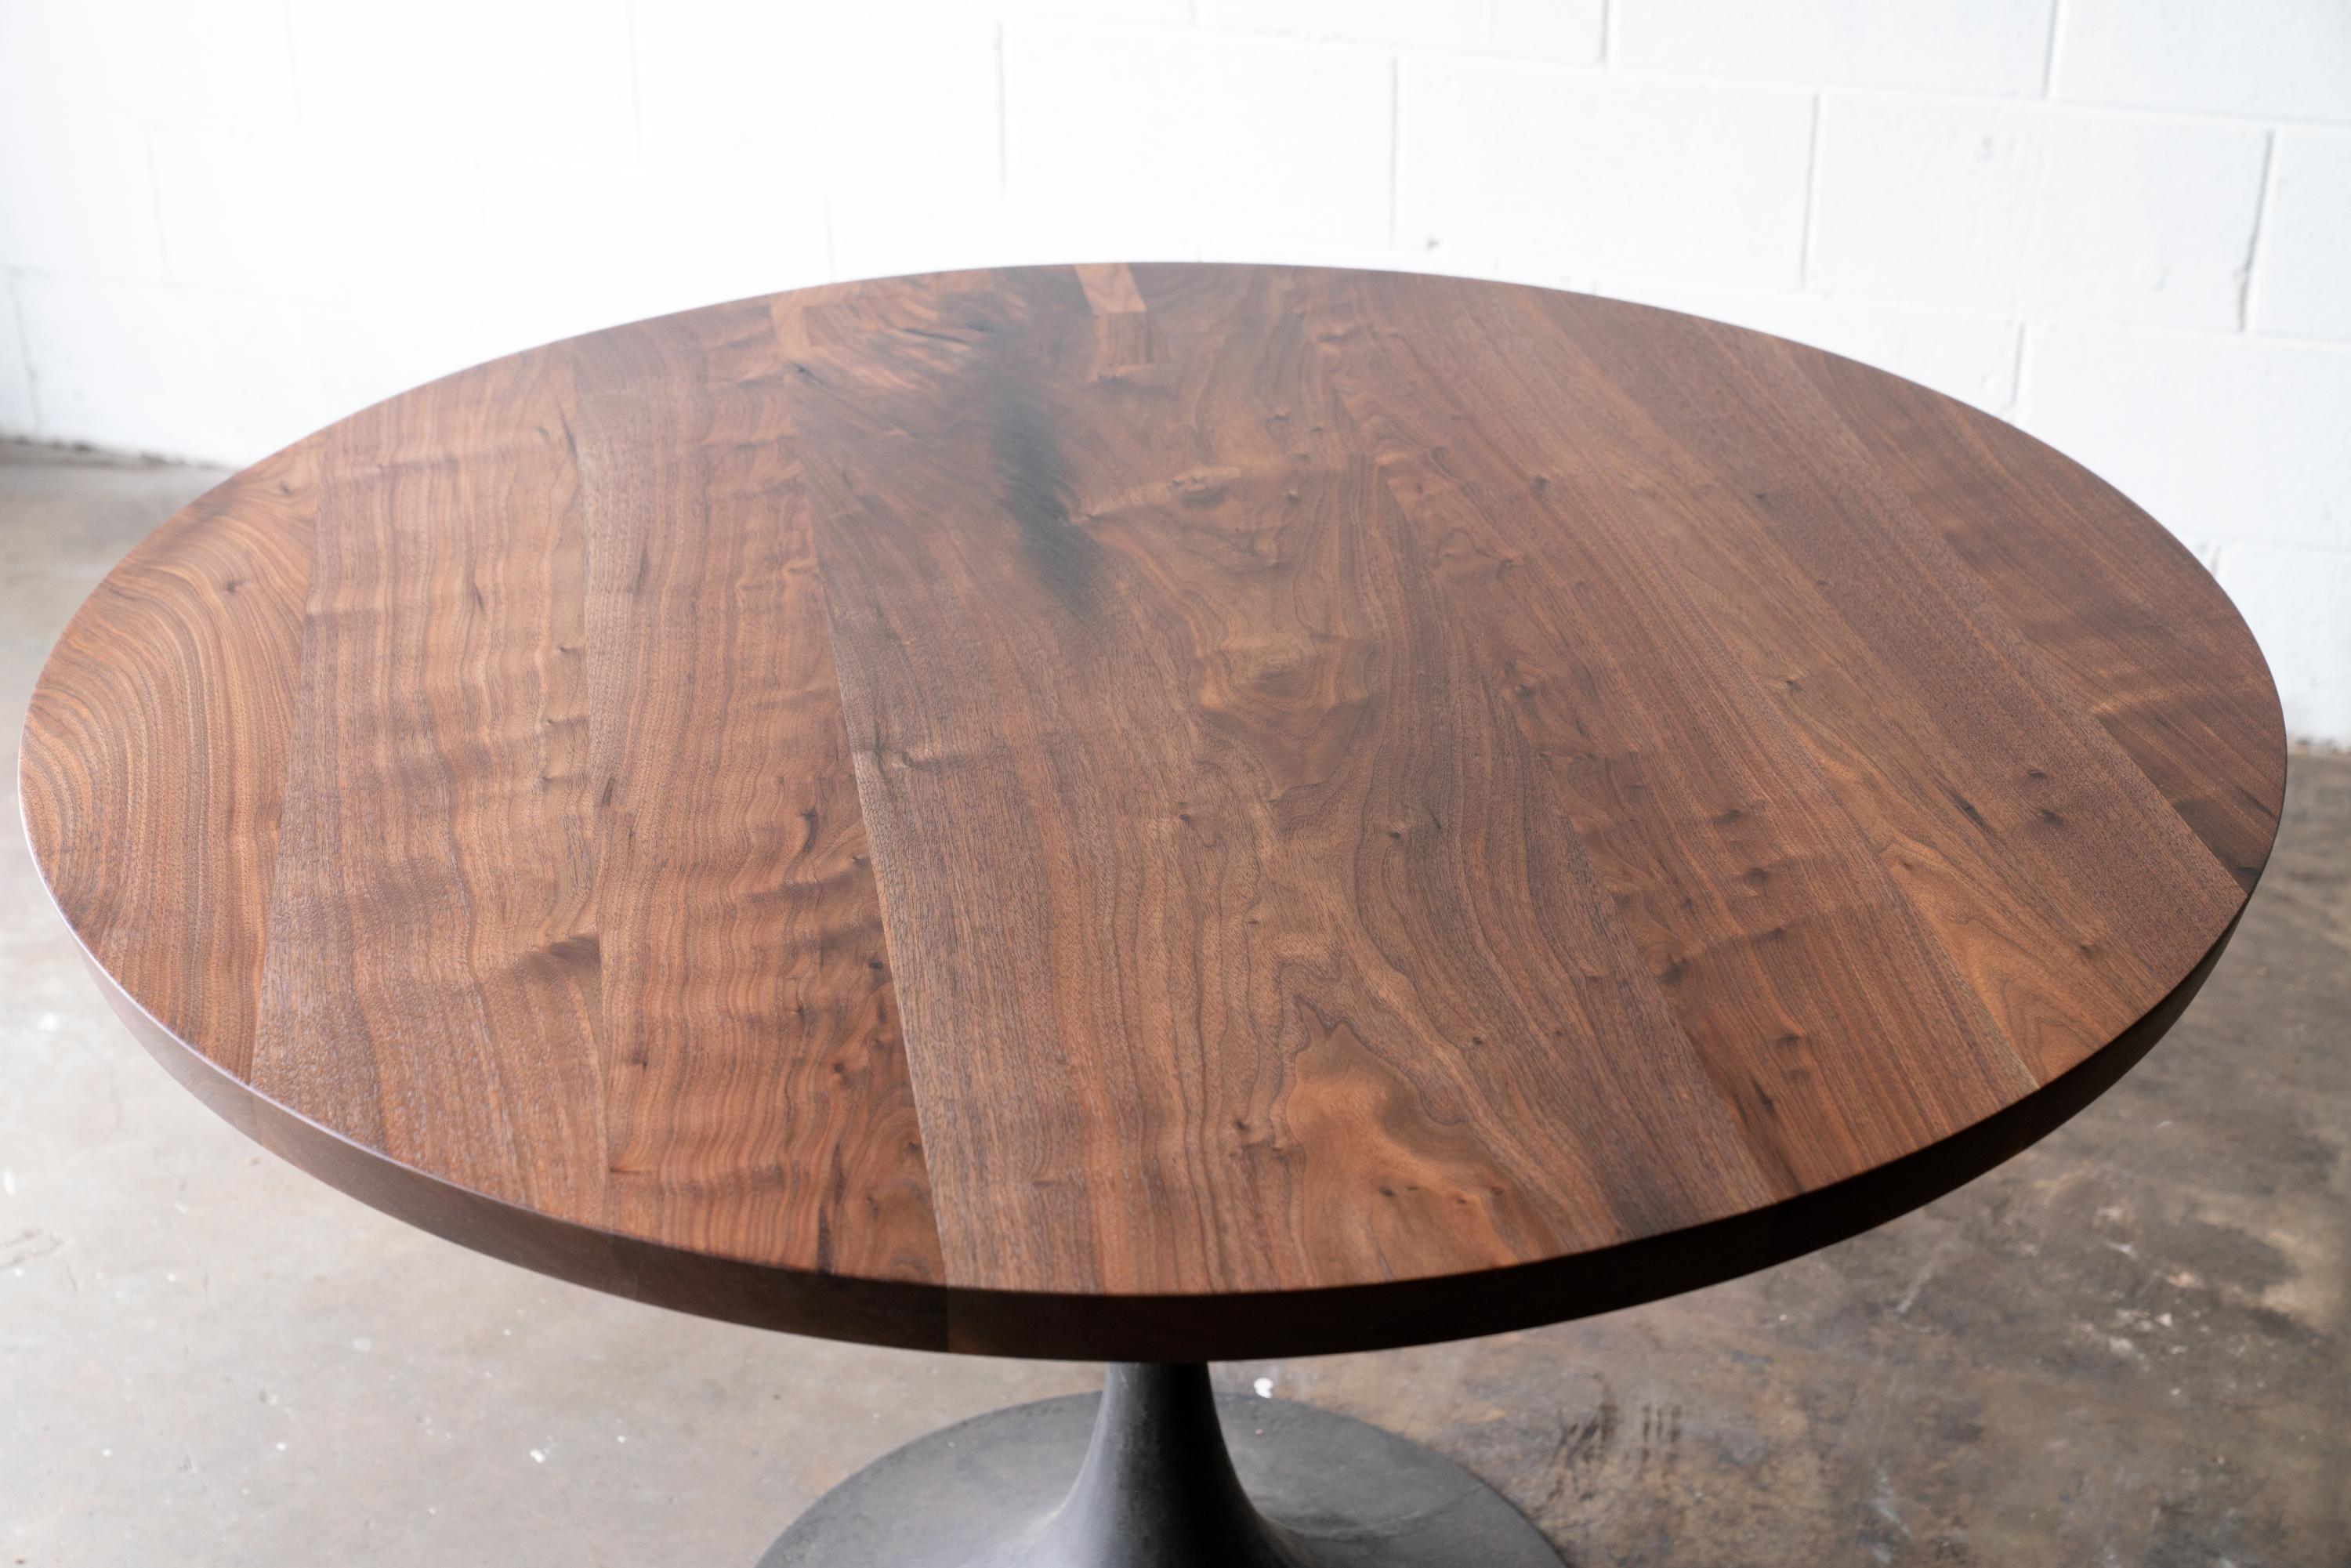 Round Pedestal Base Dining Table Solid Walnut Wood Cast Iron Amicalola Base In New Condition For Sale In Birmingham, AL